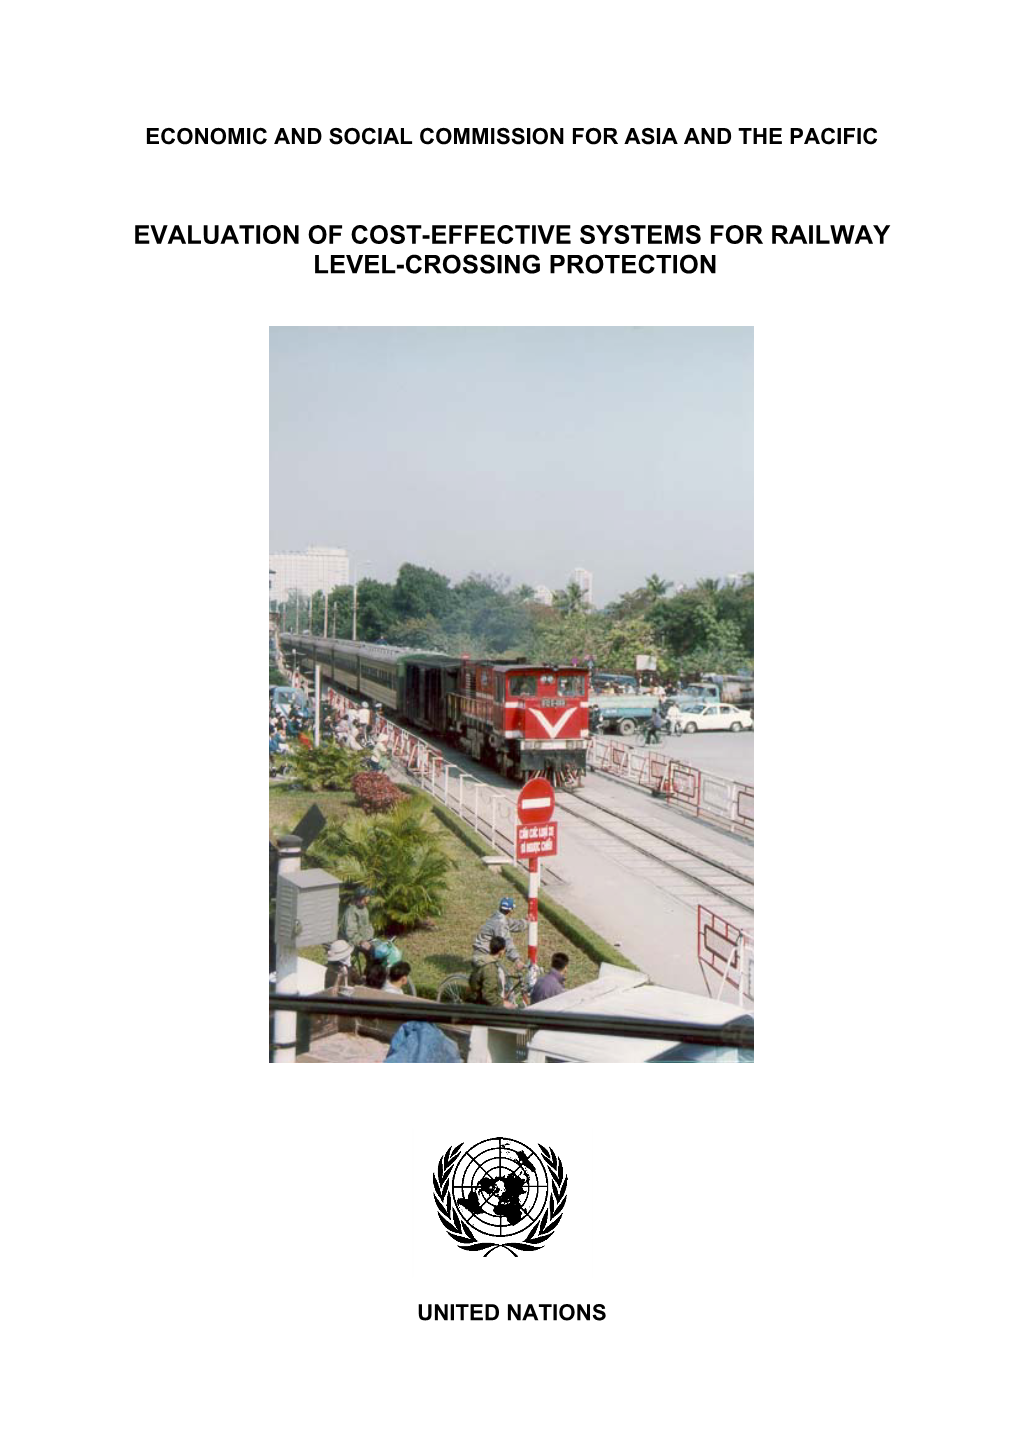 Evaluation of Cost-Effective Systems for Railway Level-Crossing Protection